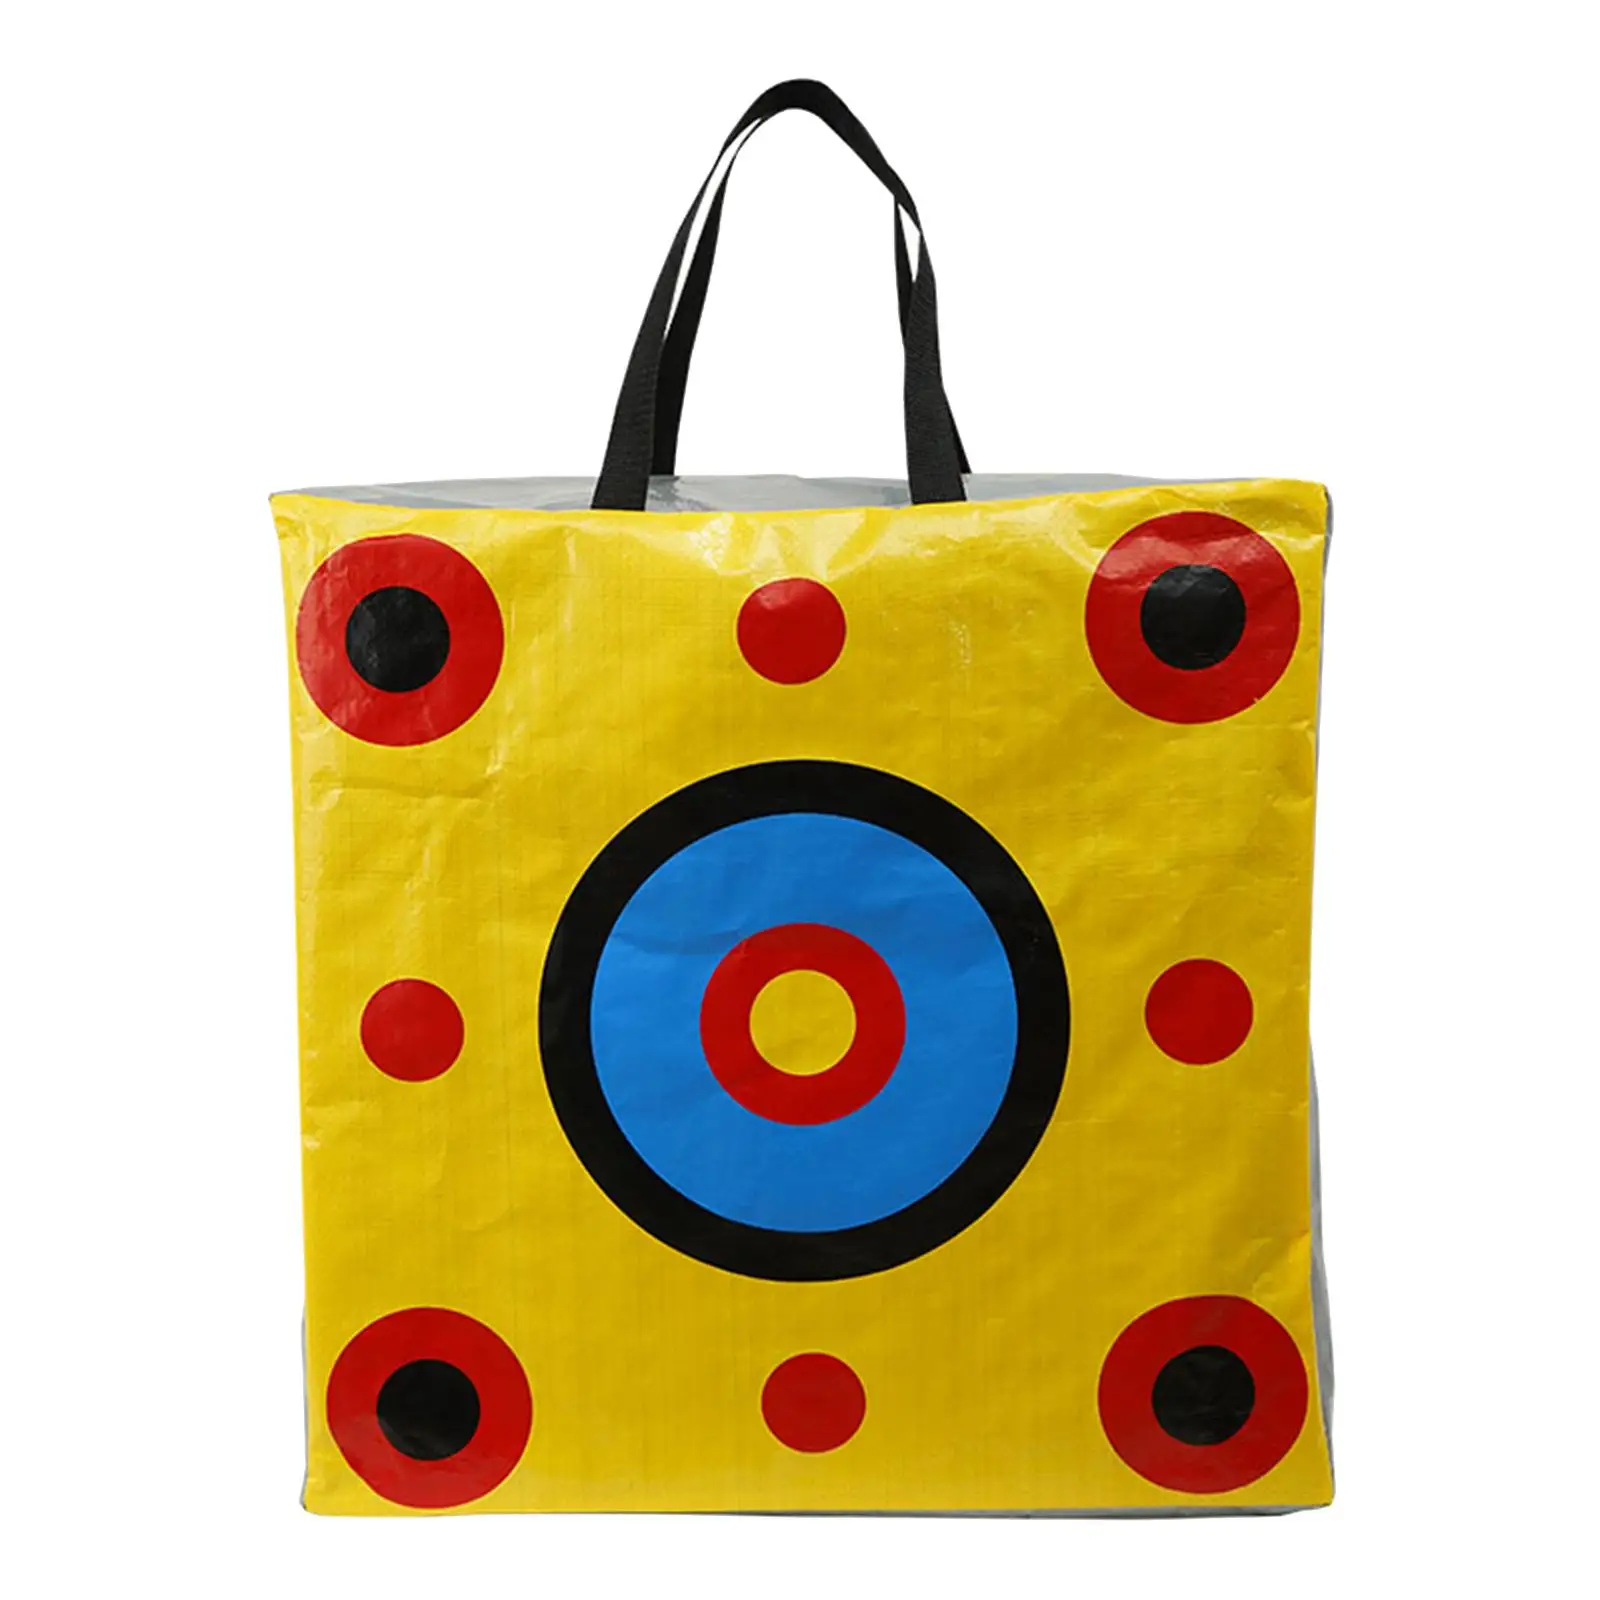 Shooting Targets Garden Exercise Equipment Field Point Bag Archery Target